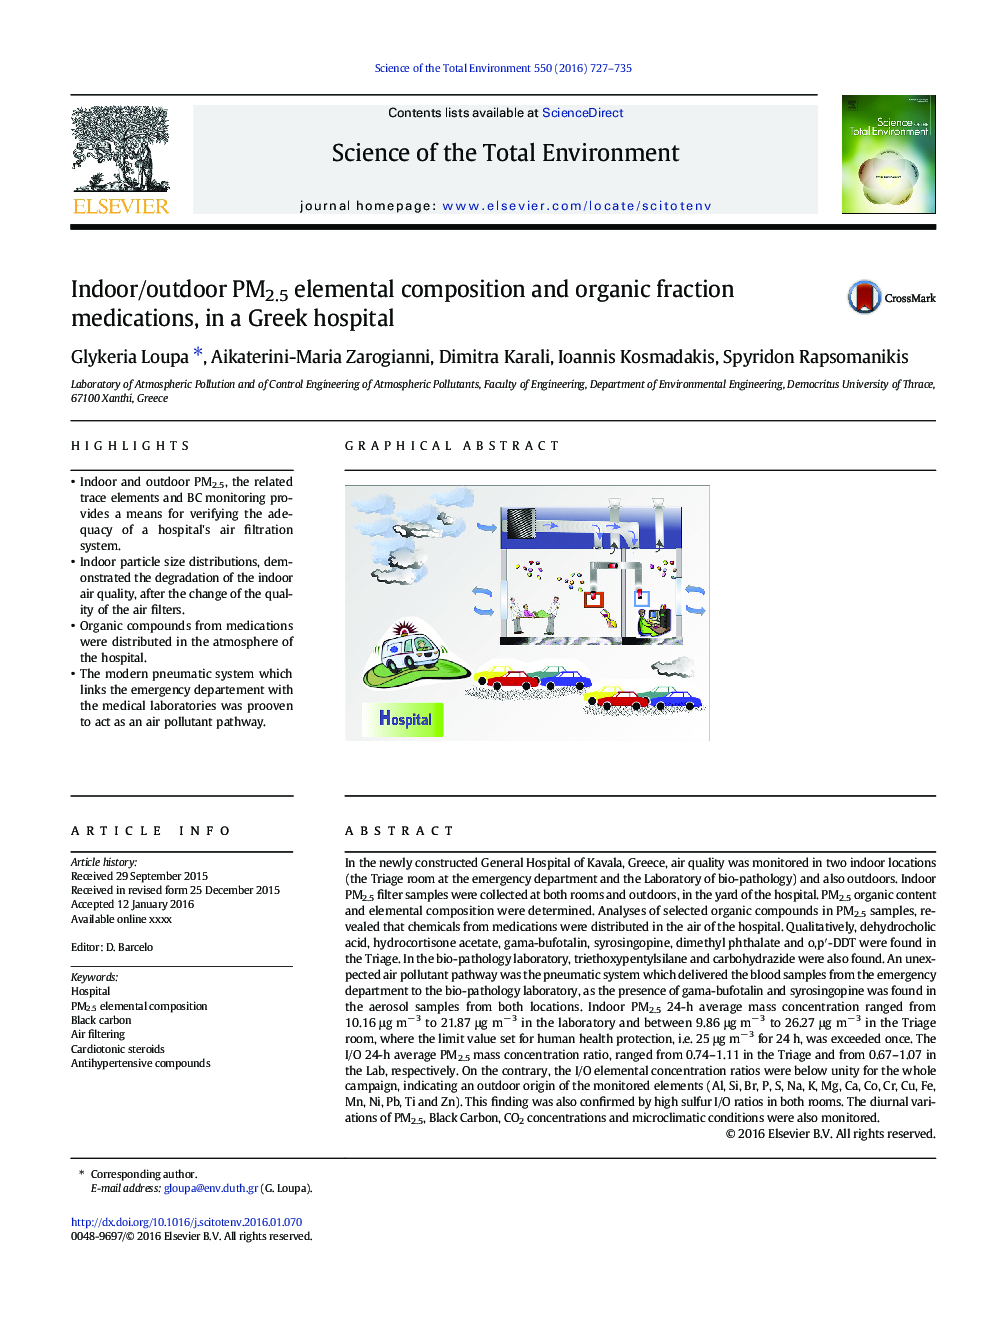 Indoor/outdoor PM2.5 elemental composition and organic fraction medications, in a Greek hospital